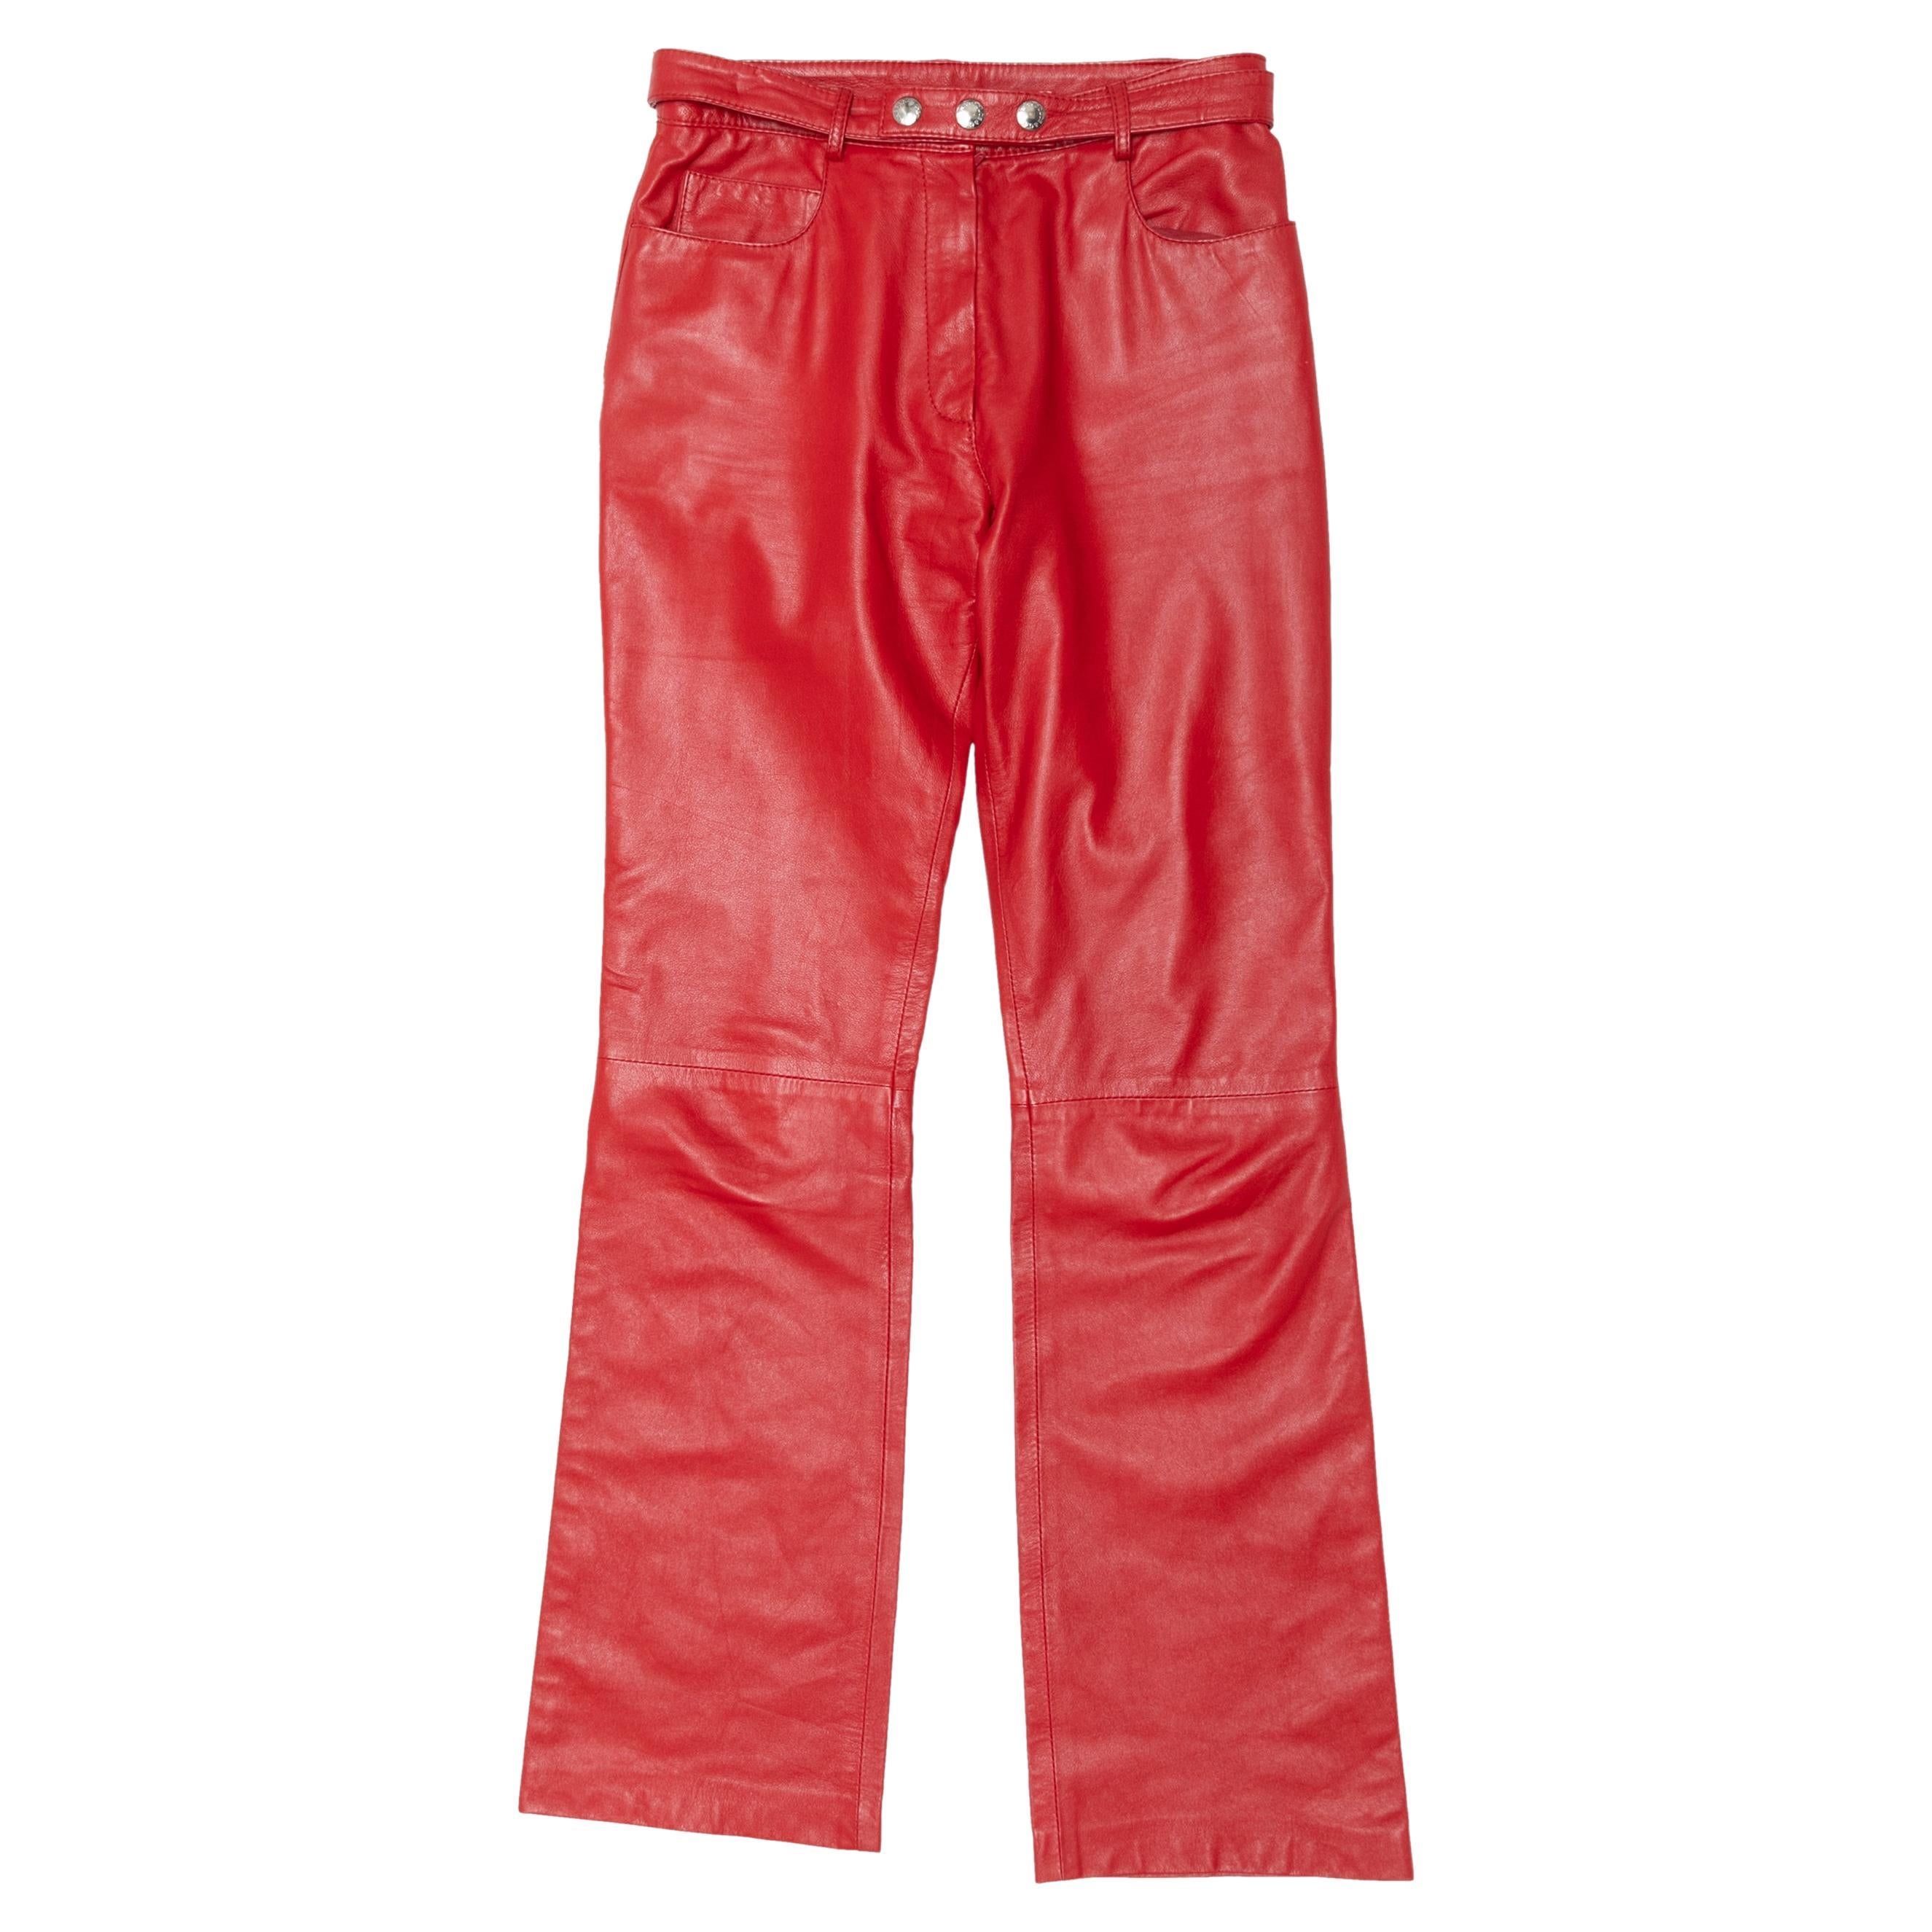 Vintage Red Dolce & Gabbana Leather Pants Size US S/M For Sale